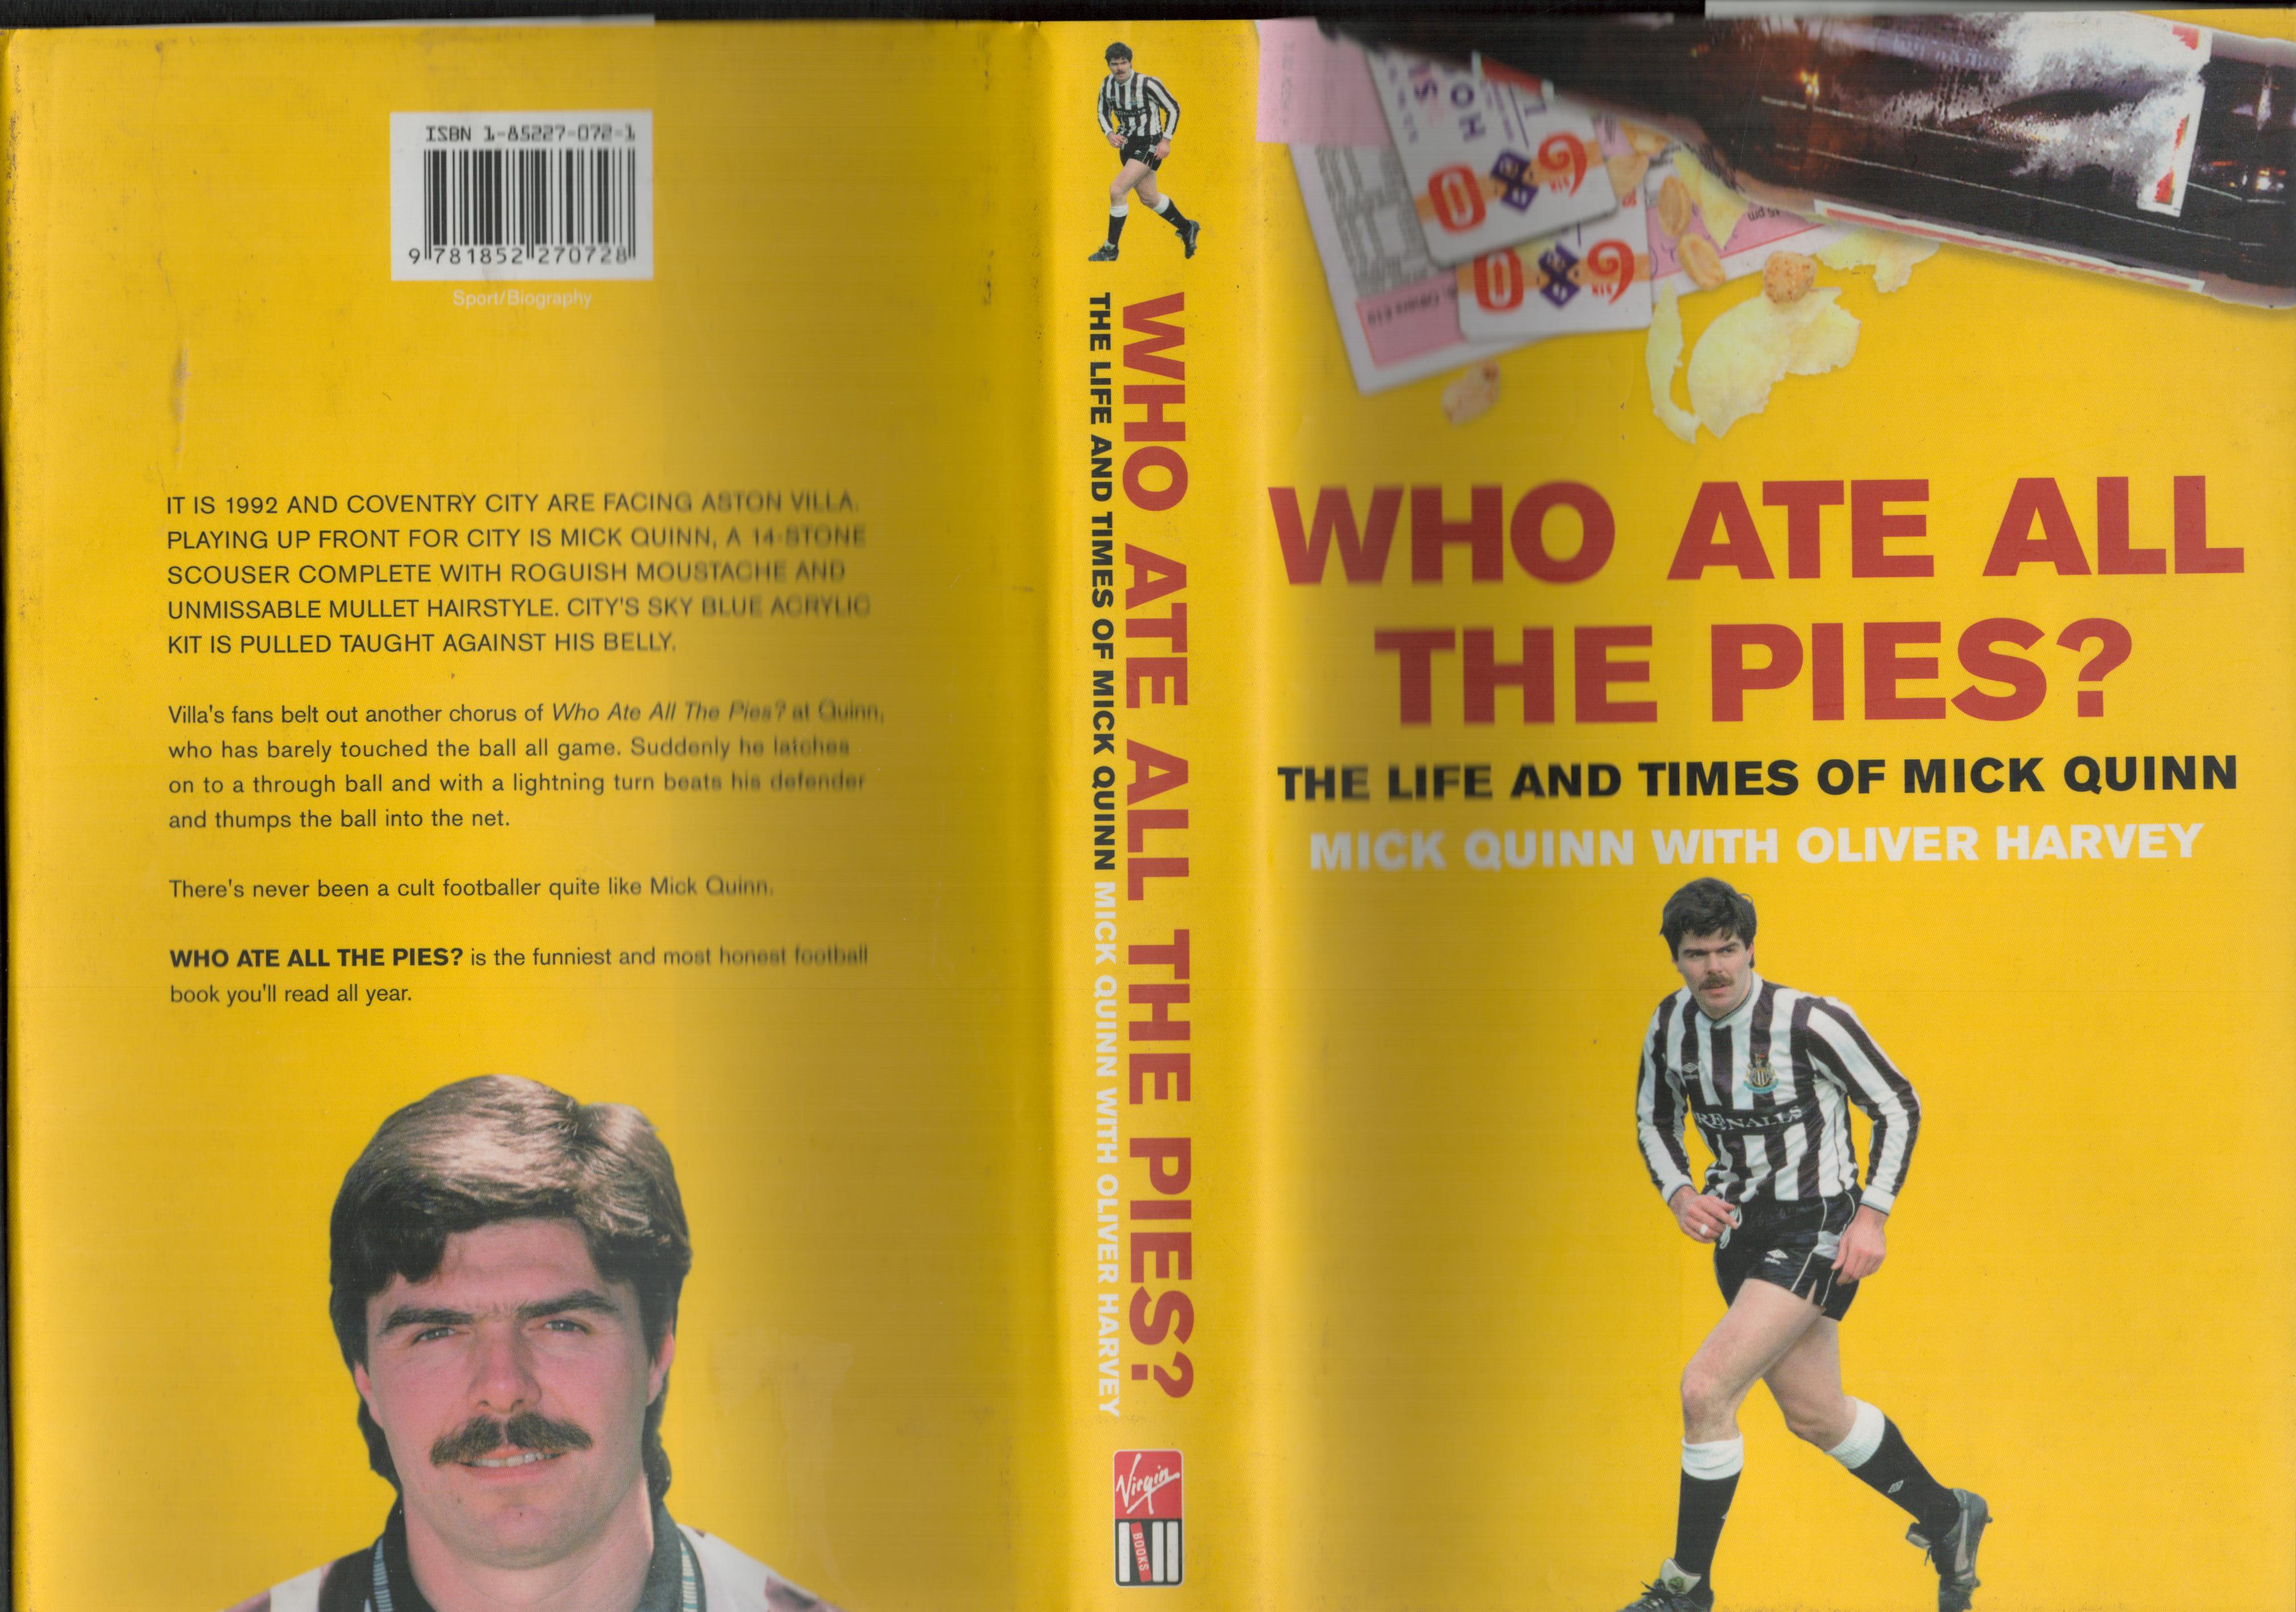 Who Ate All The Pies The Life and Times Of Mick Quinn. 1st Edition Hardback Book Published in